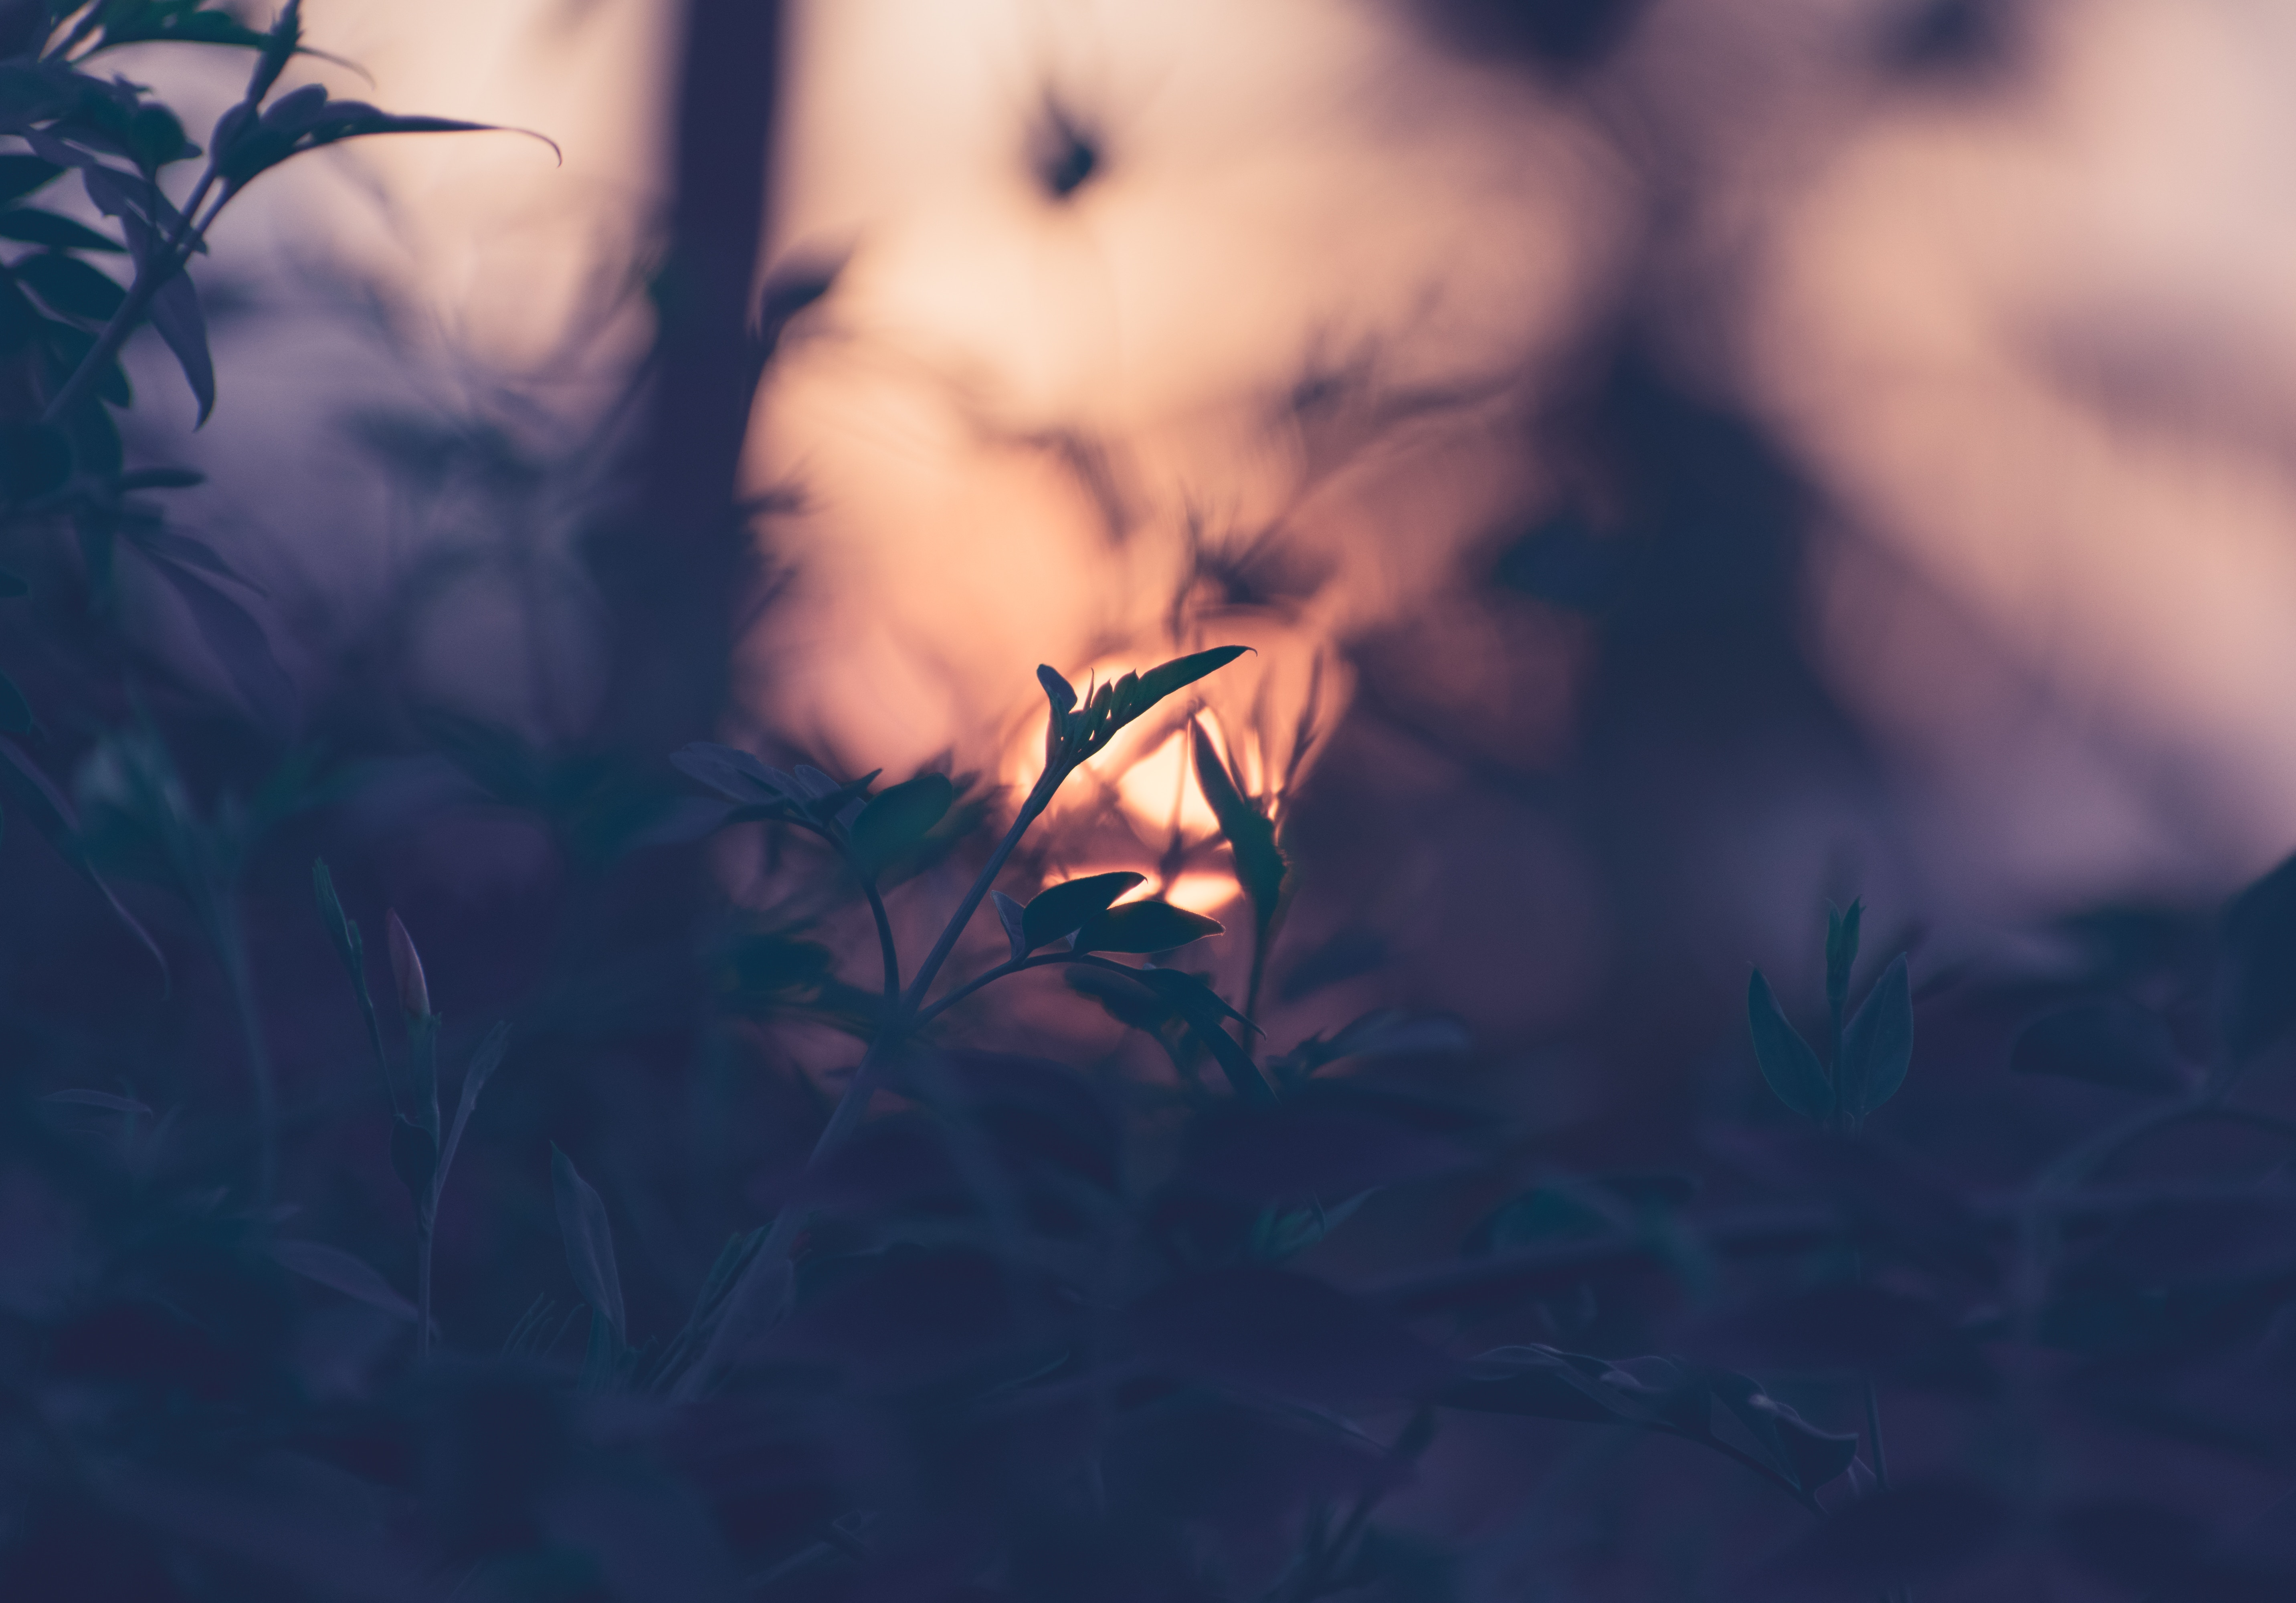 smooth, blur, sunset, leaves, plant, macro, branches wallpaper for mobile